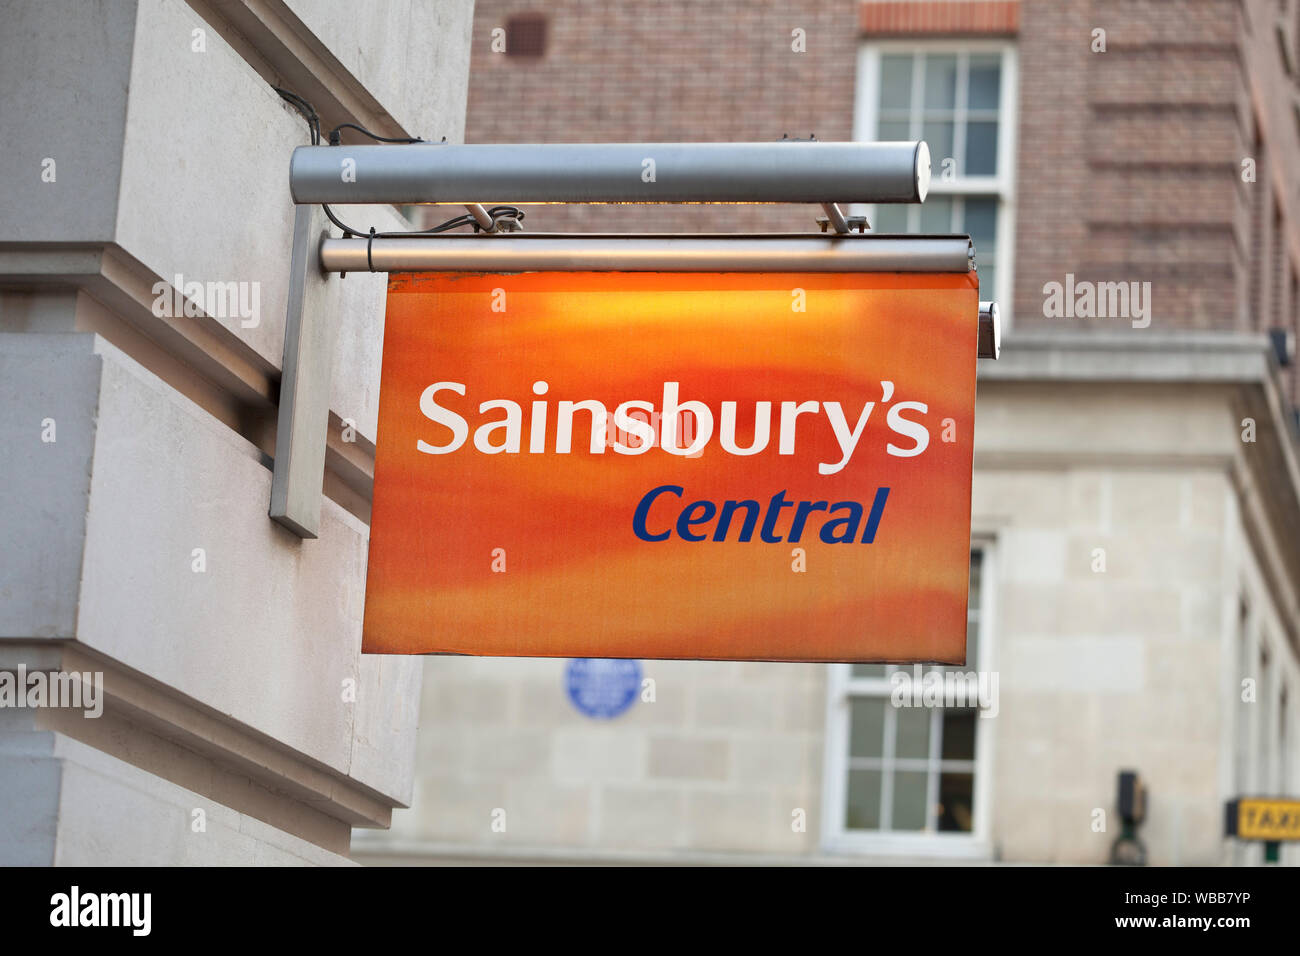 Sainsbury's Central sign Stock Photo